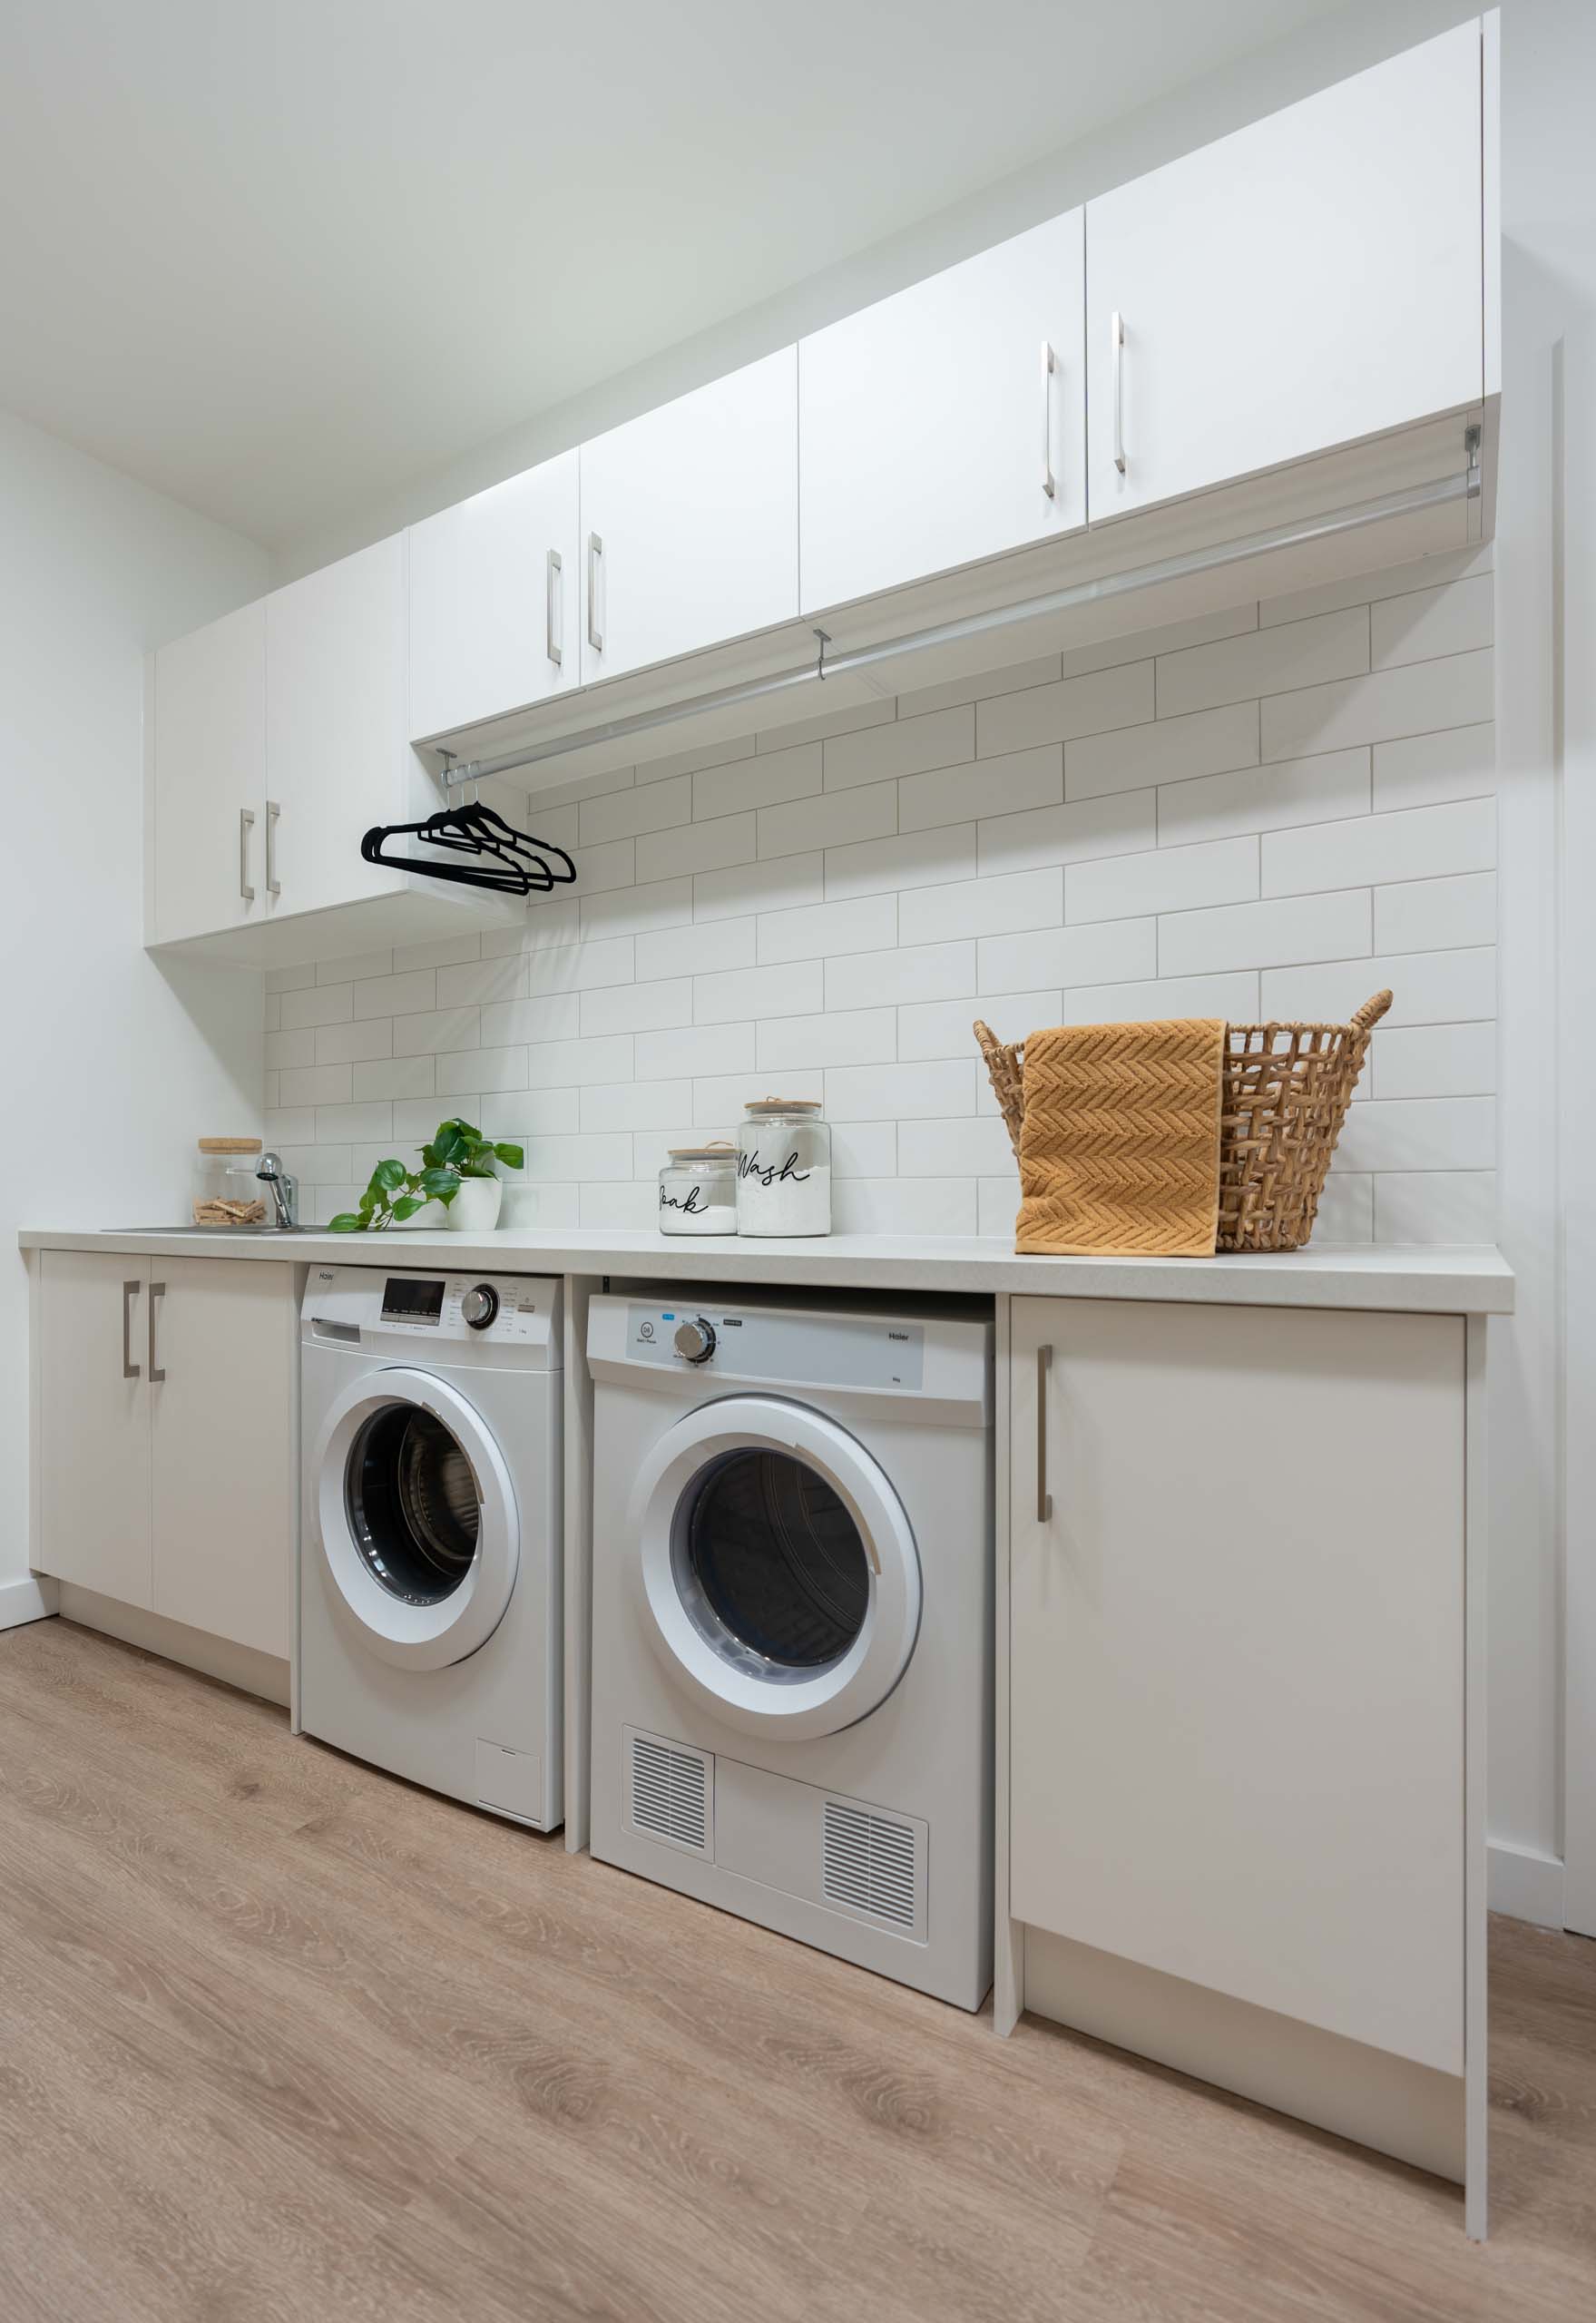 White laundry with overhead cabinets showcasing a hanging rail. White subway tiles in a brick bond pattern